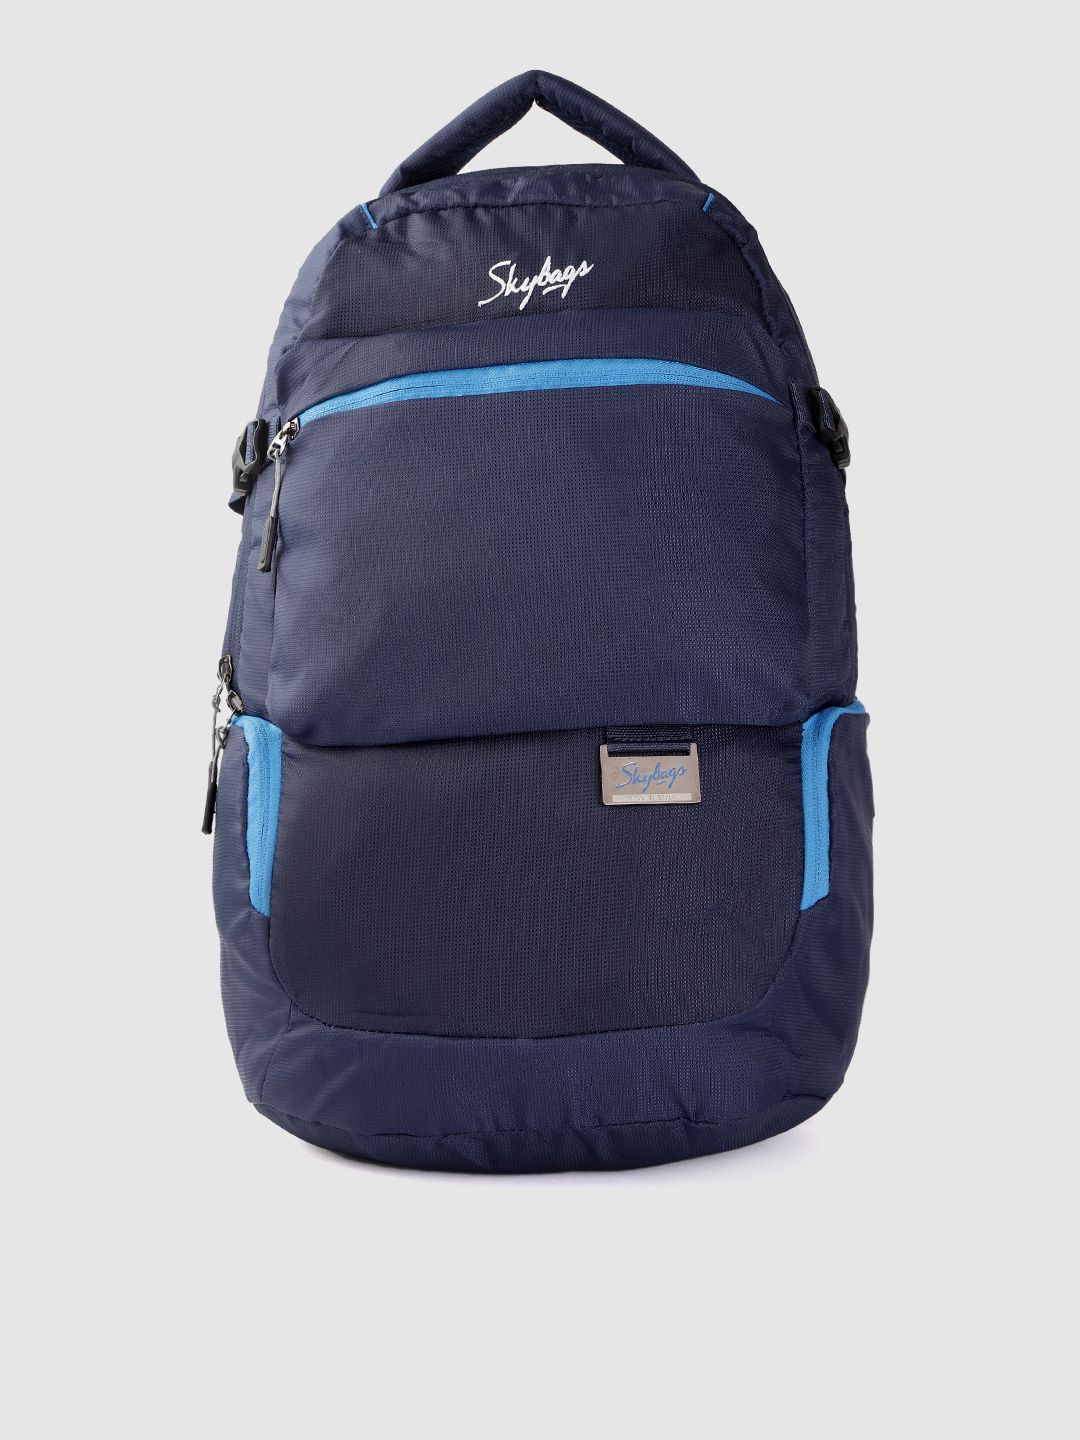 Skybags Unisex Navy Blue Solid Backpack Price in India